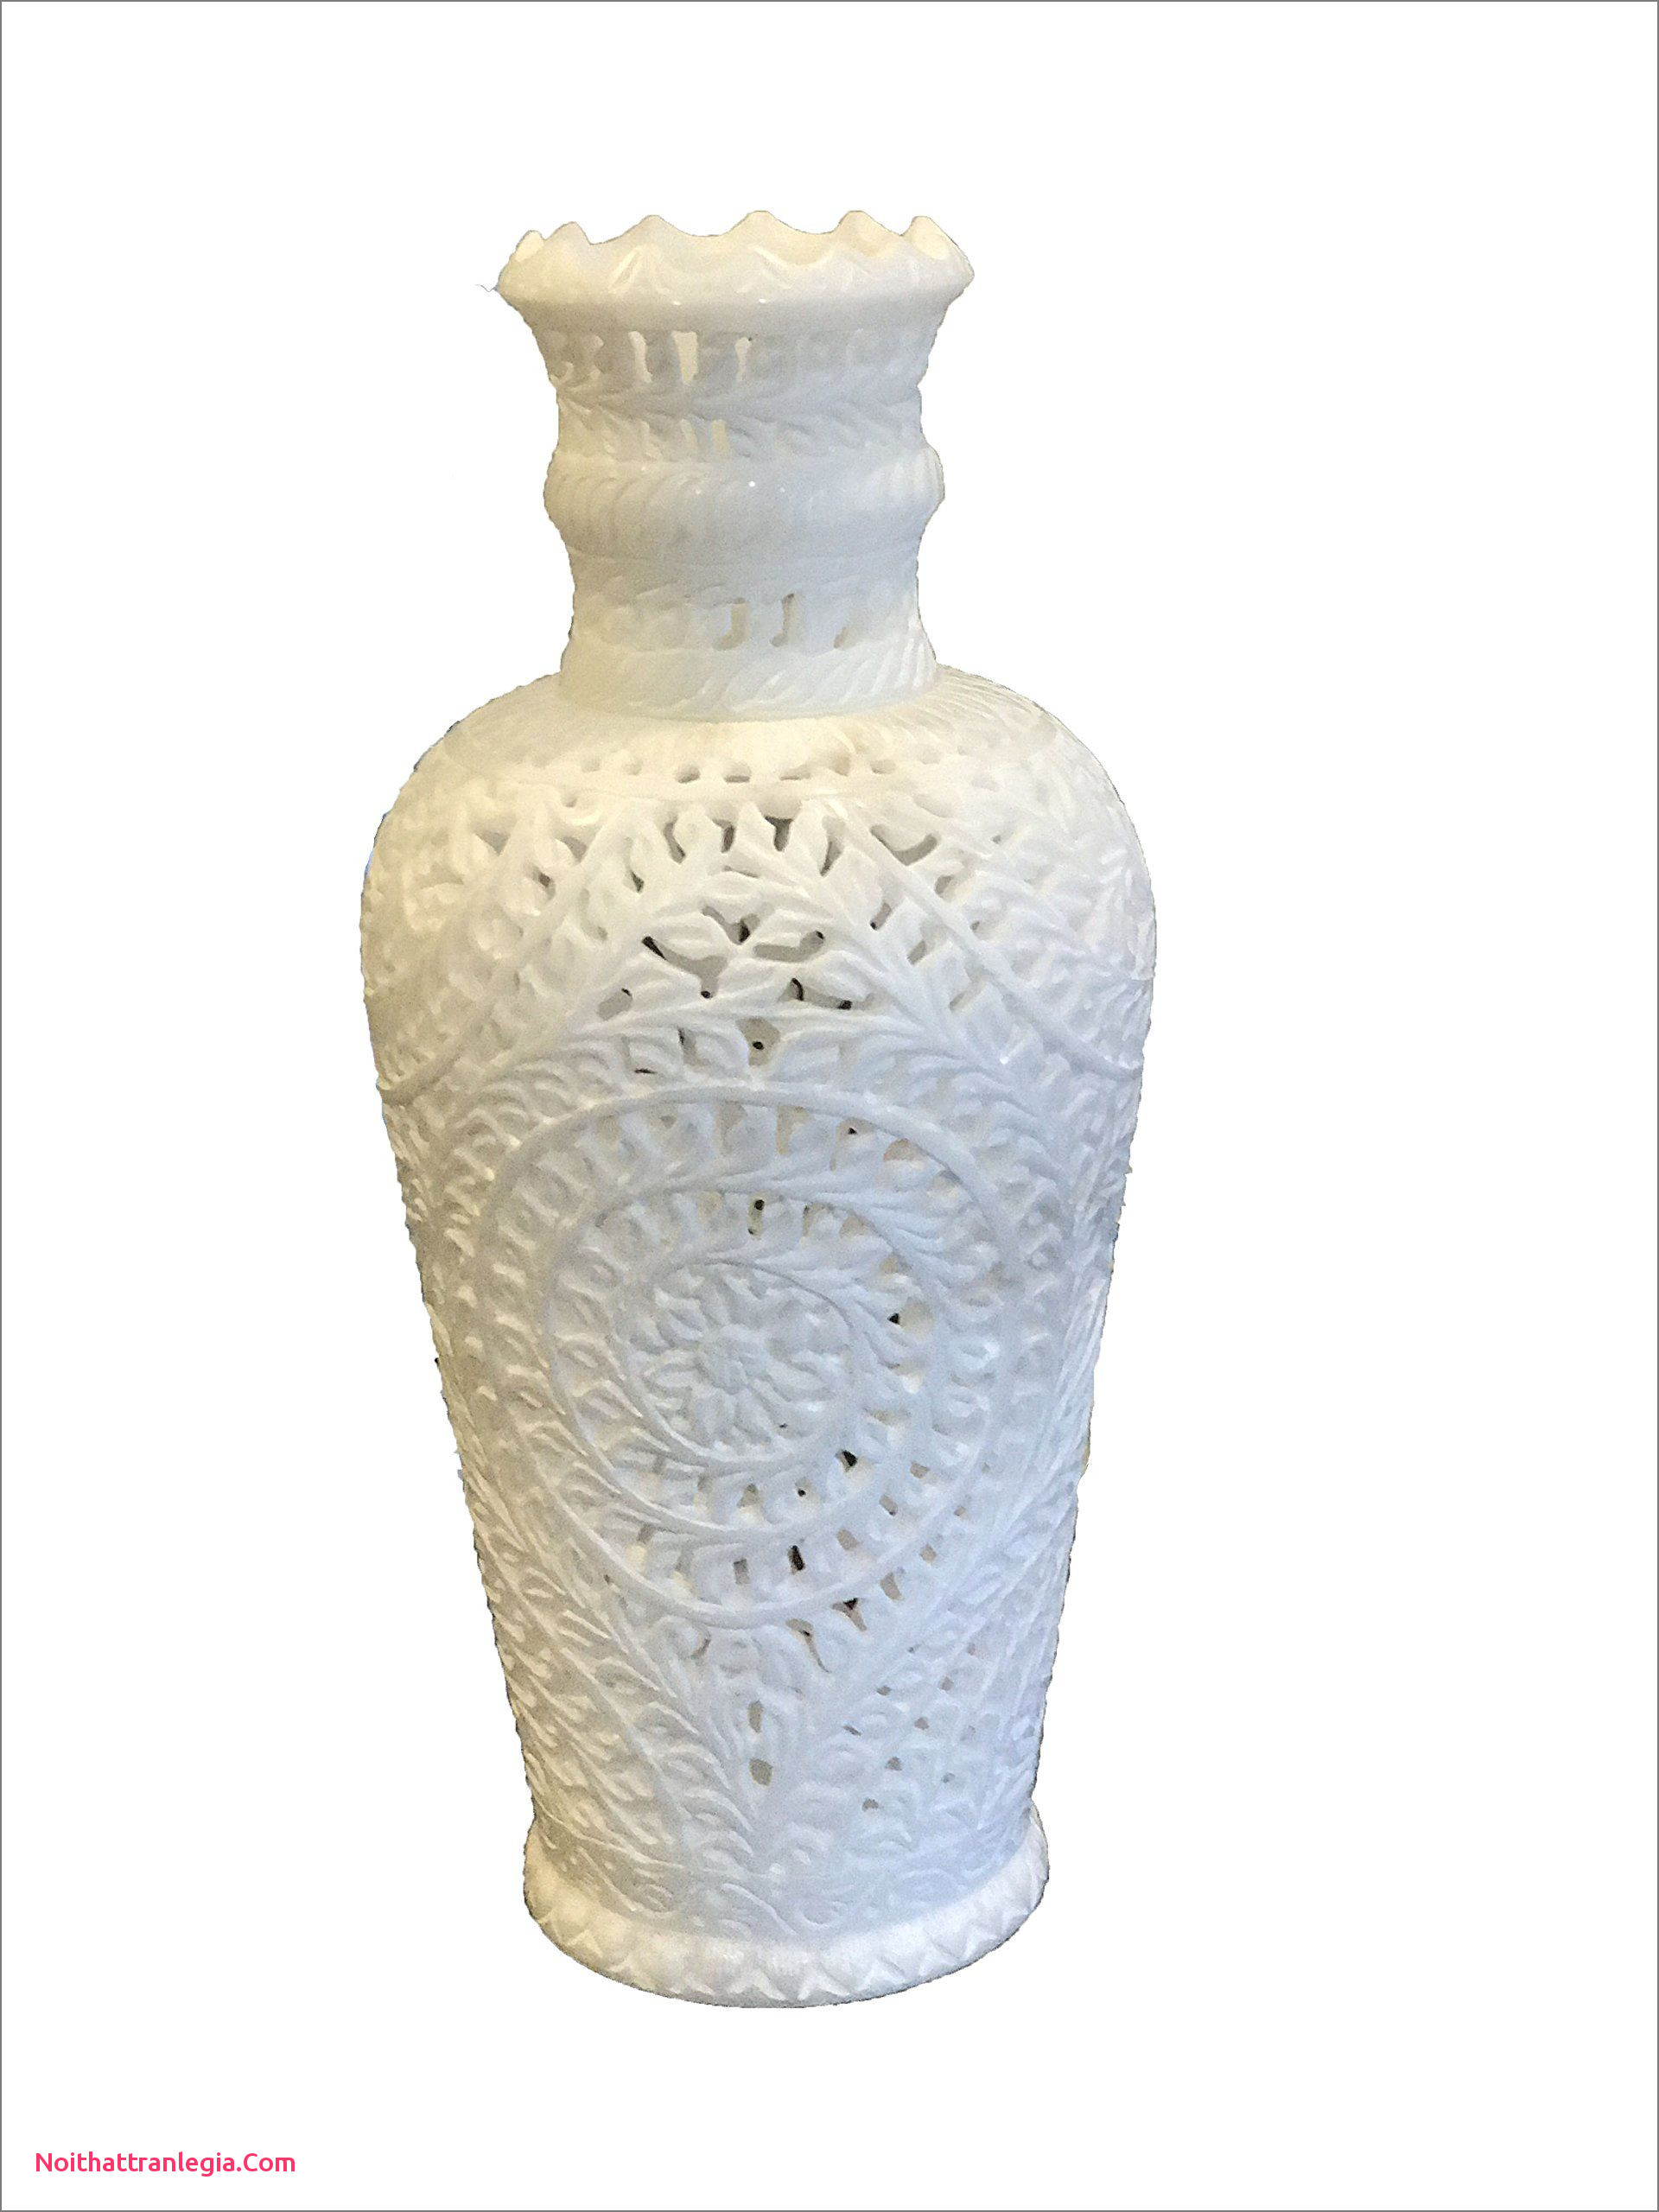 15 attractive Decorative Blue Vase 2024 free download decorative blue vase of 20 how to clean flower vases noithattranlegia vases design in white marble flower vase handcrafted stone decorative wedding diy vases handcrafted by artisans this